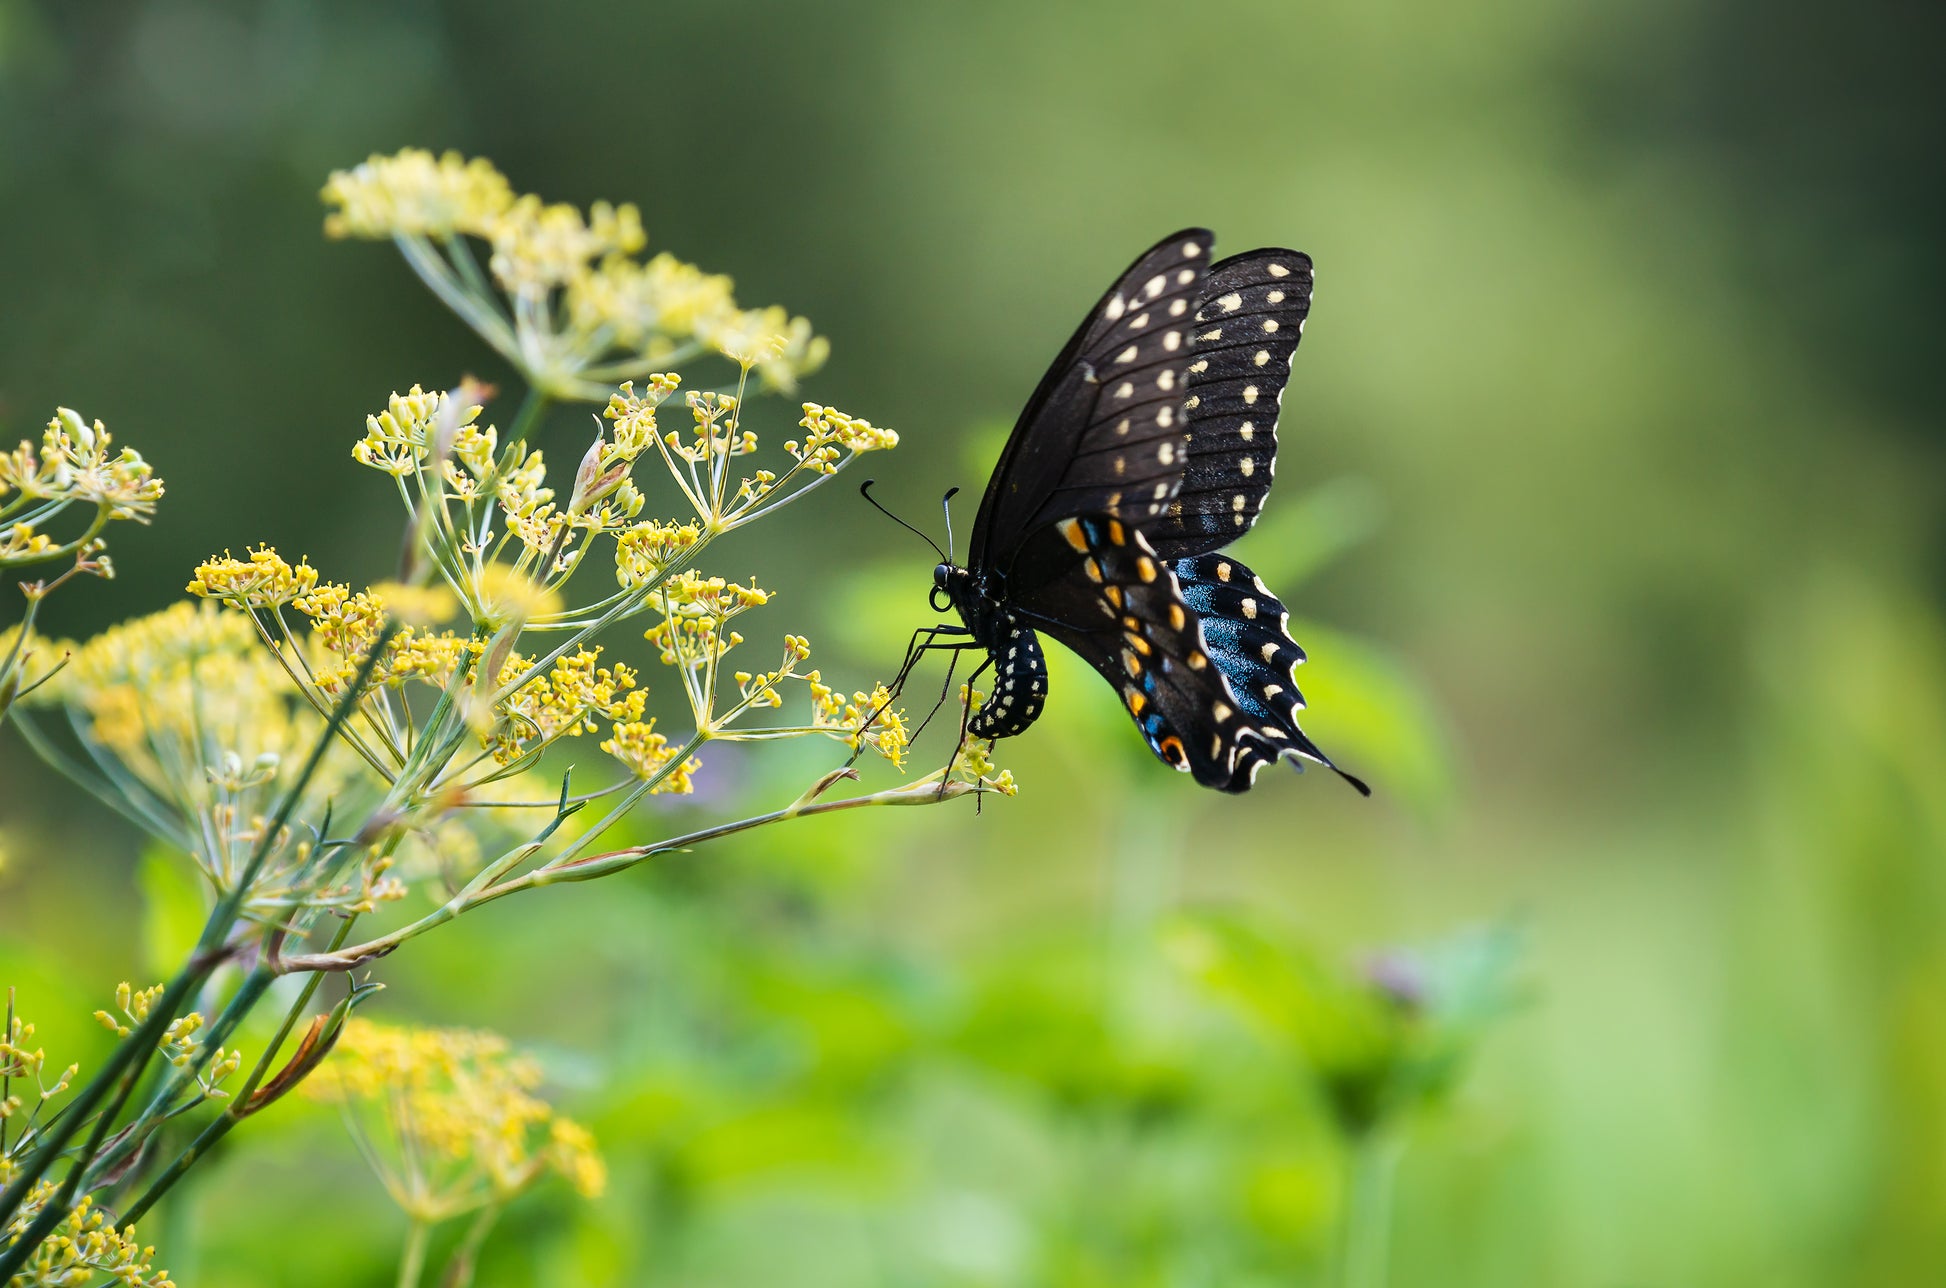 Black swallowtail butterfly on his host plant Daucus carota " wild carrot"